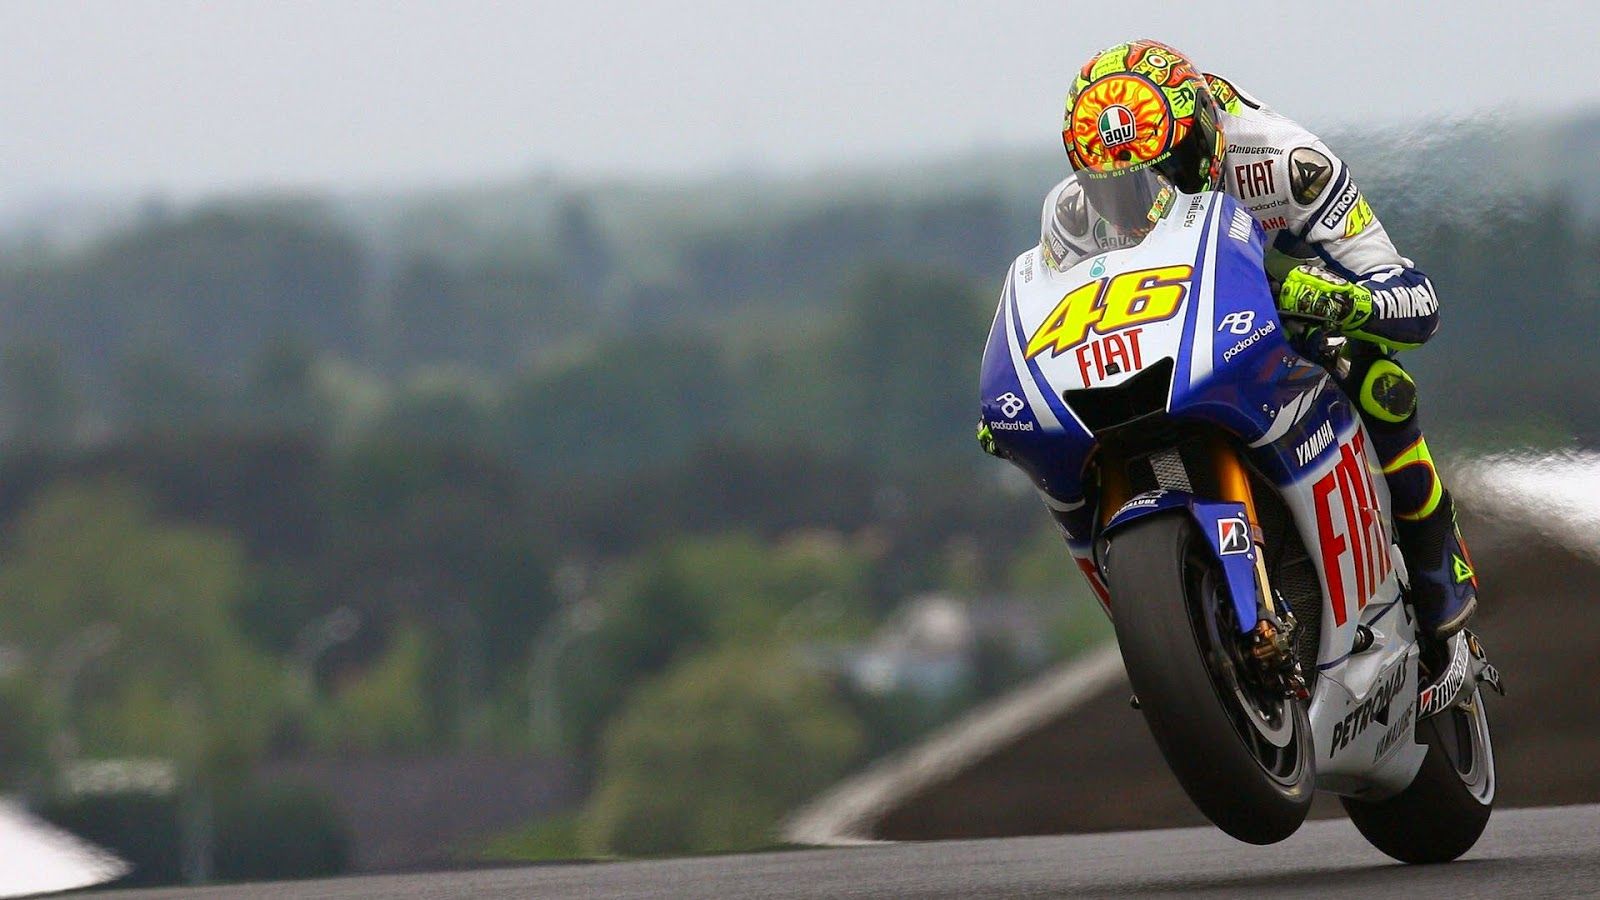 Free download Valentino Rossi Yamaha Wallpaper HD Walpaperes [1600x900] for your Desktop, Mobile & Tablet. Explore Valentino Rossi Wallpaper HD. Motogp Wallpaper, MotoGP Wallpaper Widescreen, MotoGP Wallpaper HD